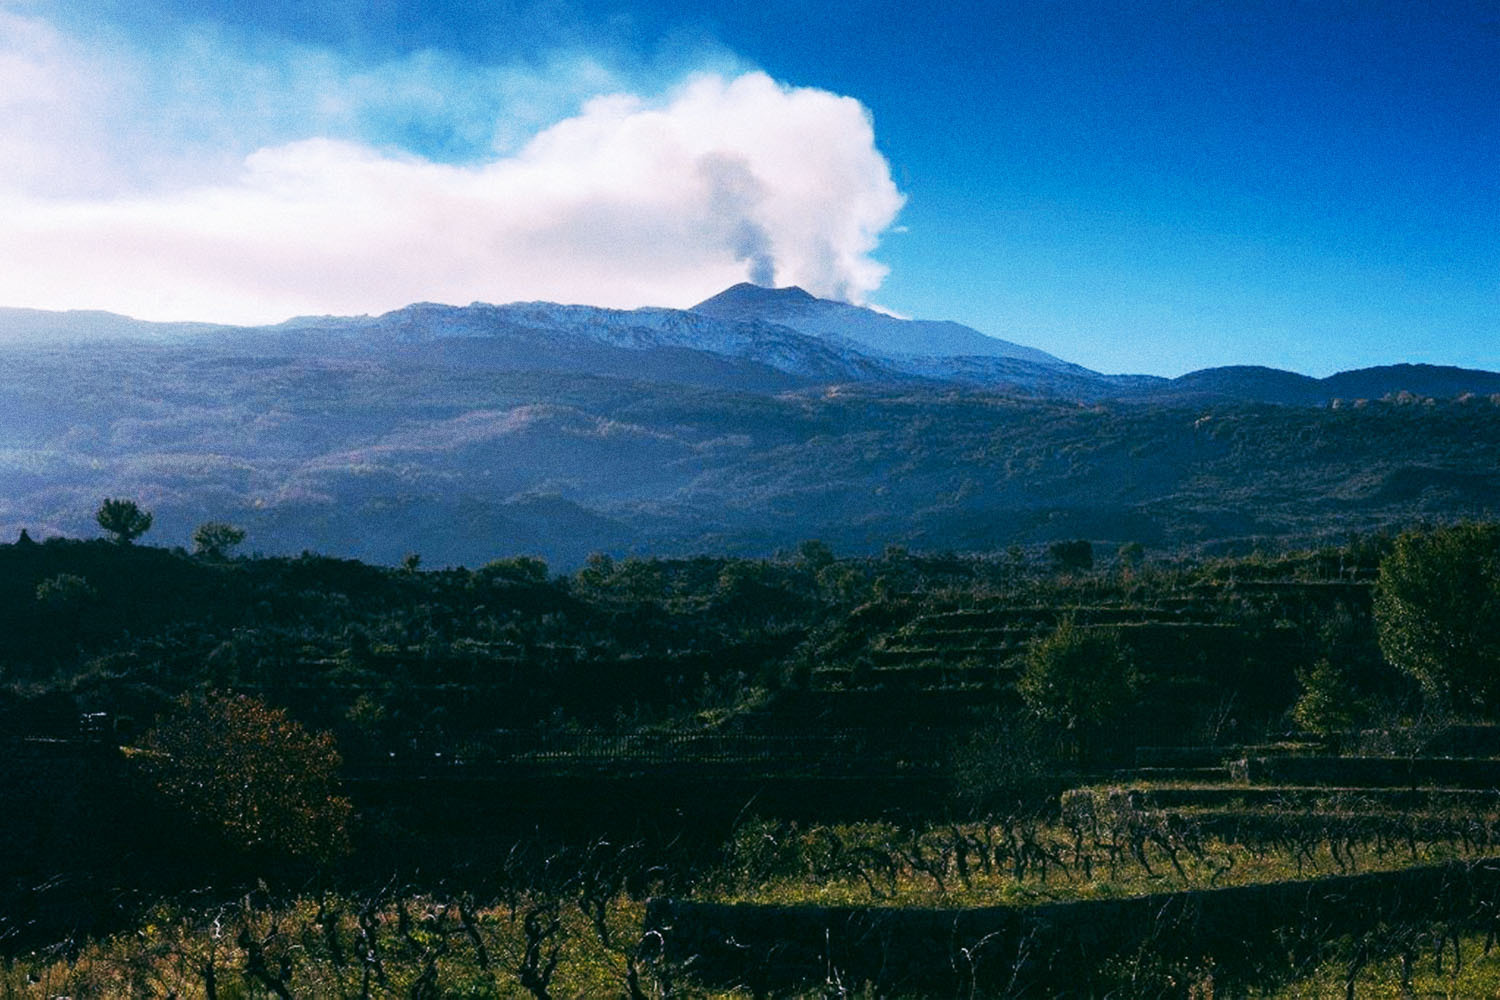 Near Sicily, this is Mount Etna in a smoking phase above the vineyards of Duca di Salaparuta.